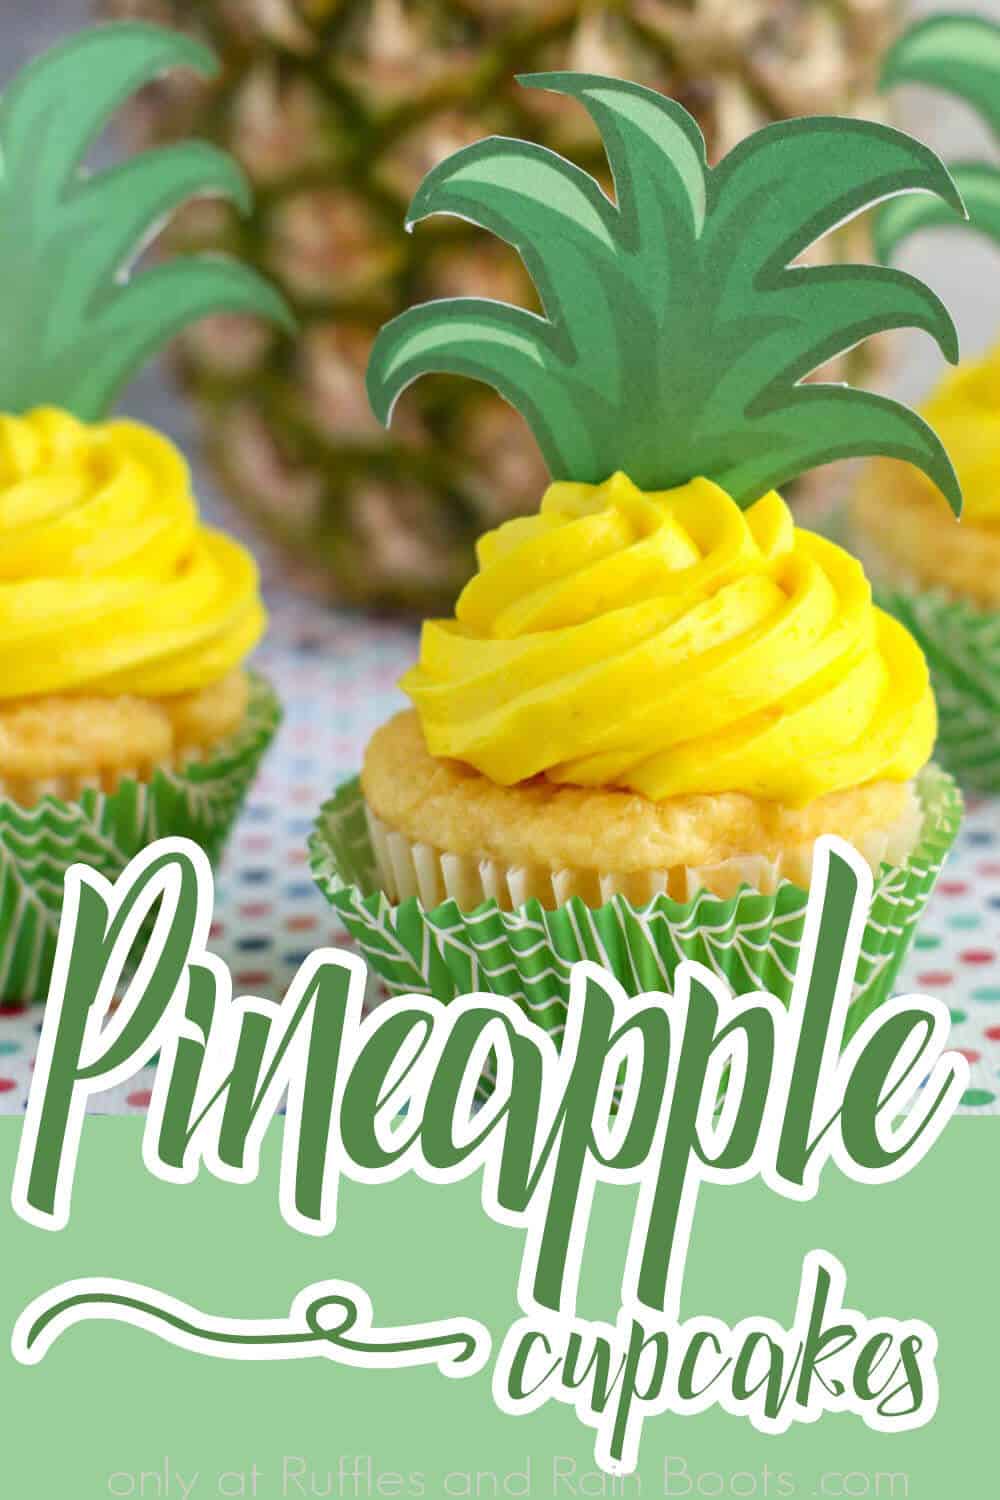 Closeup of pineapple flavored cupcakes with text which reads pineapple cupcakes.